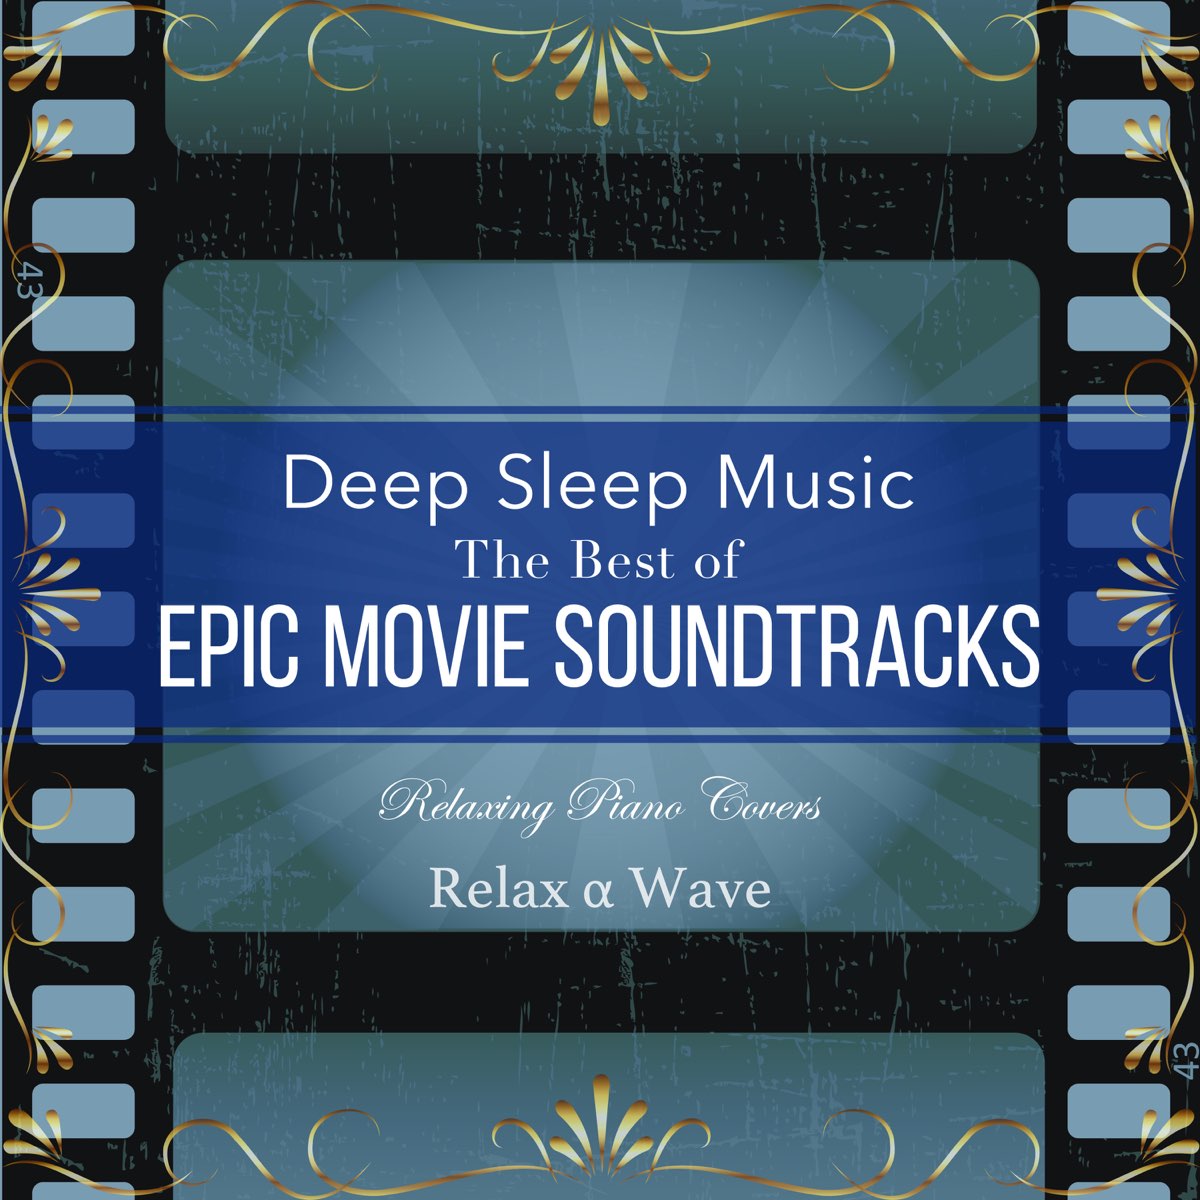 Deep Sleep Music - the Best of Epic Movie Soundtracks: Relaxing Piano  Covers by Relax α Wave on Apple Music